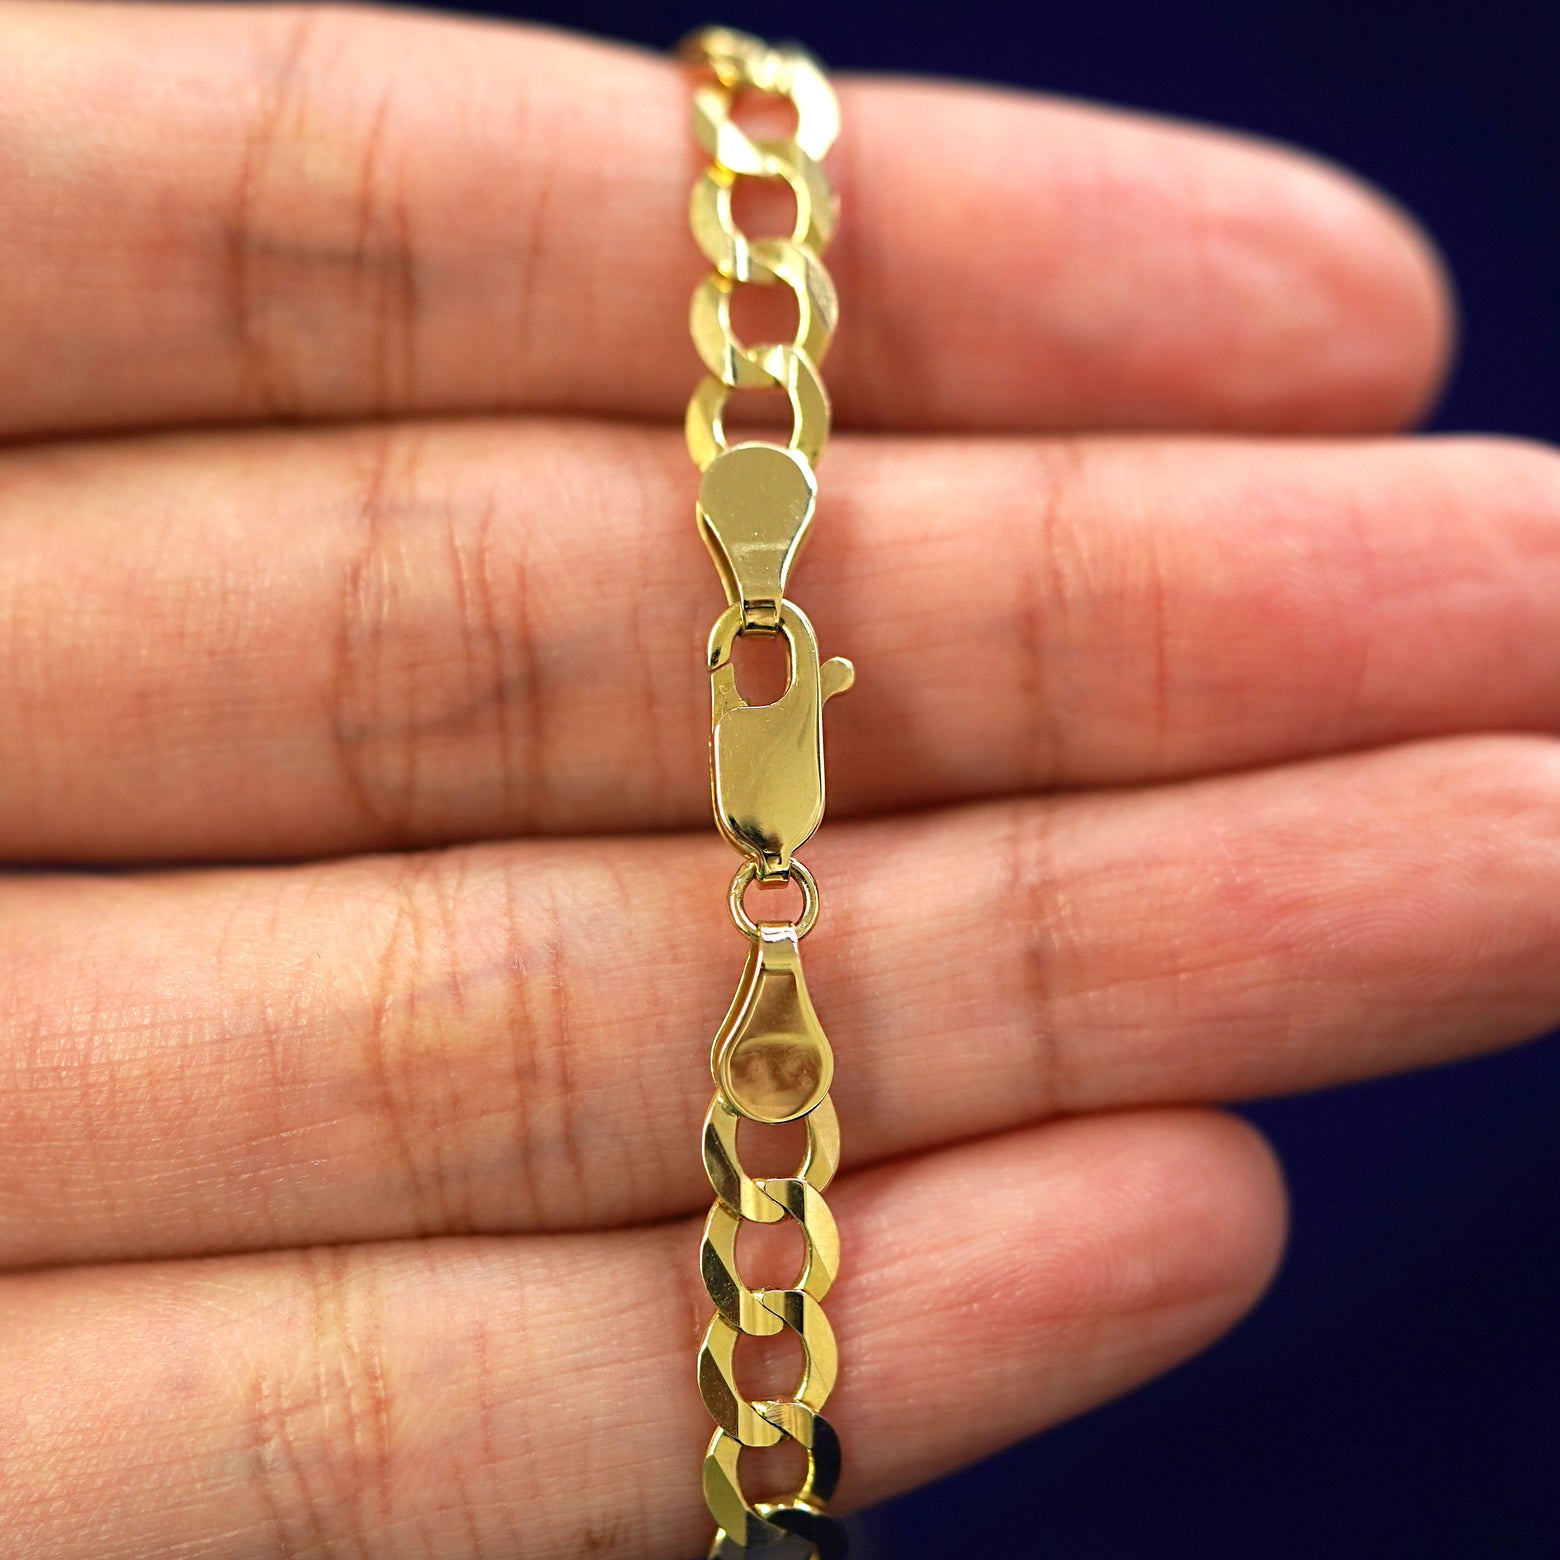 A model holding a 14k yellow gold Curb Anklet to show the lobster claw clasp